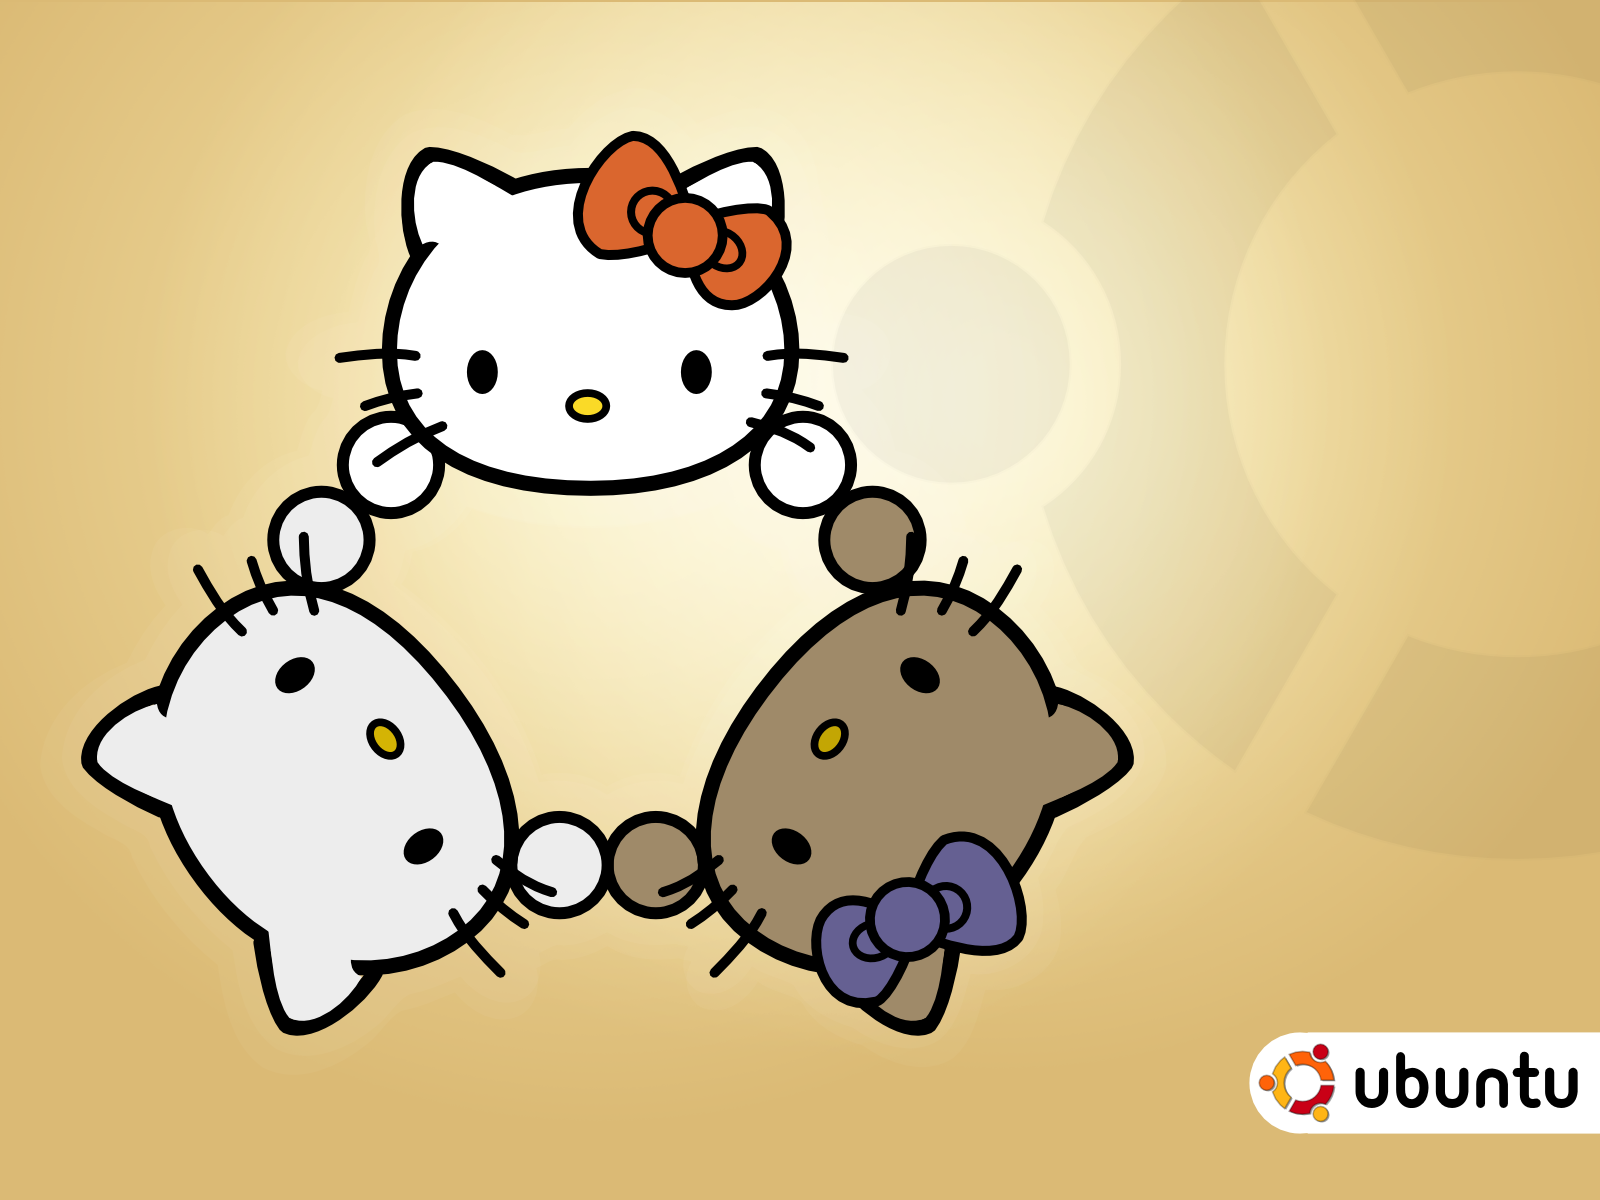 Ubuntu_Hello_Kitty_by_chipx86.png